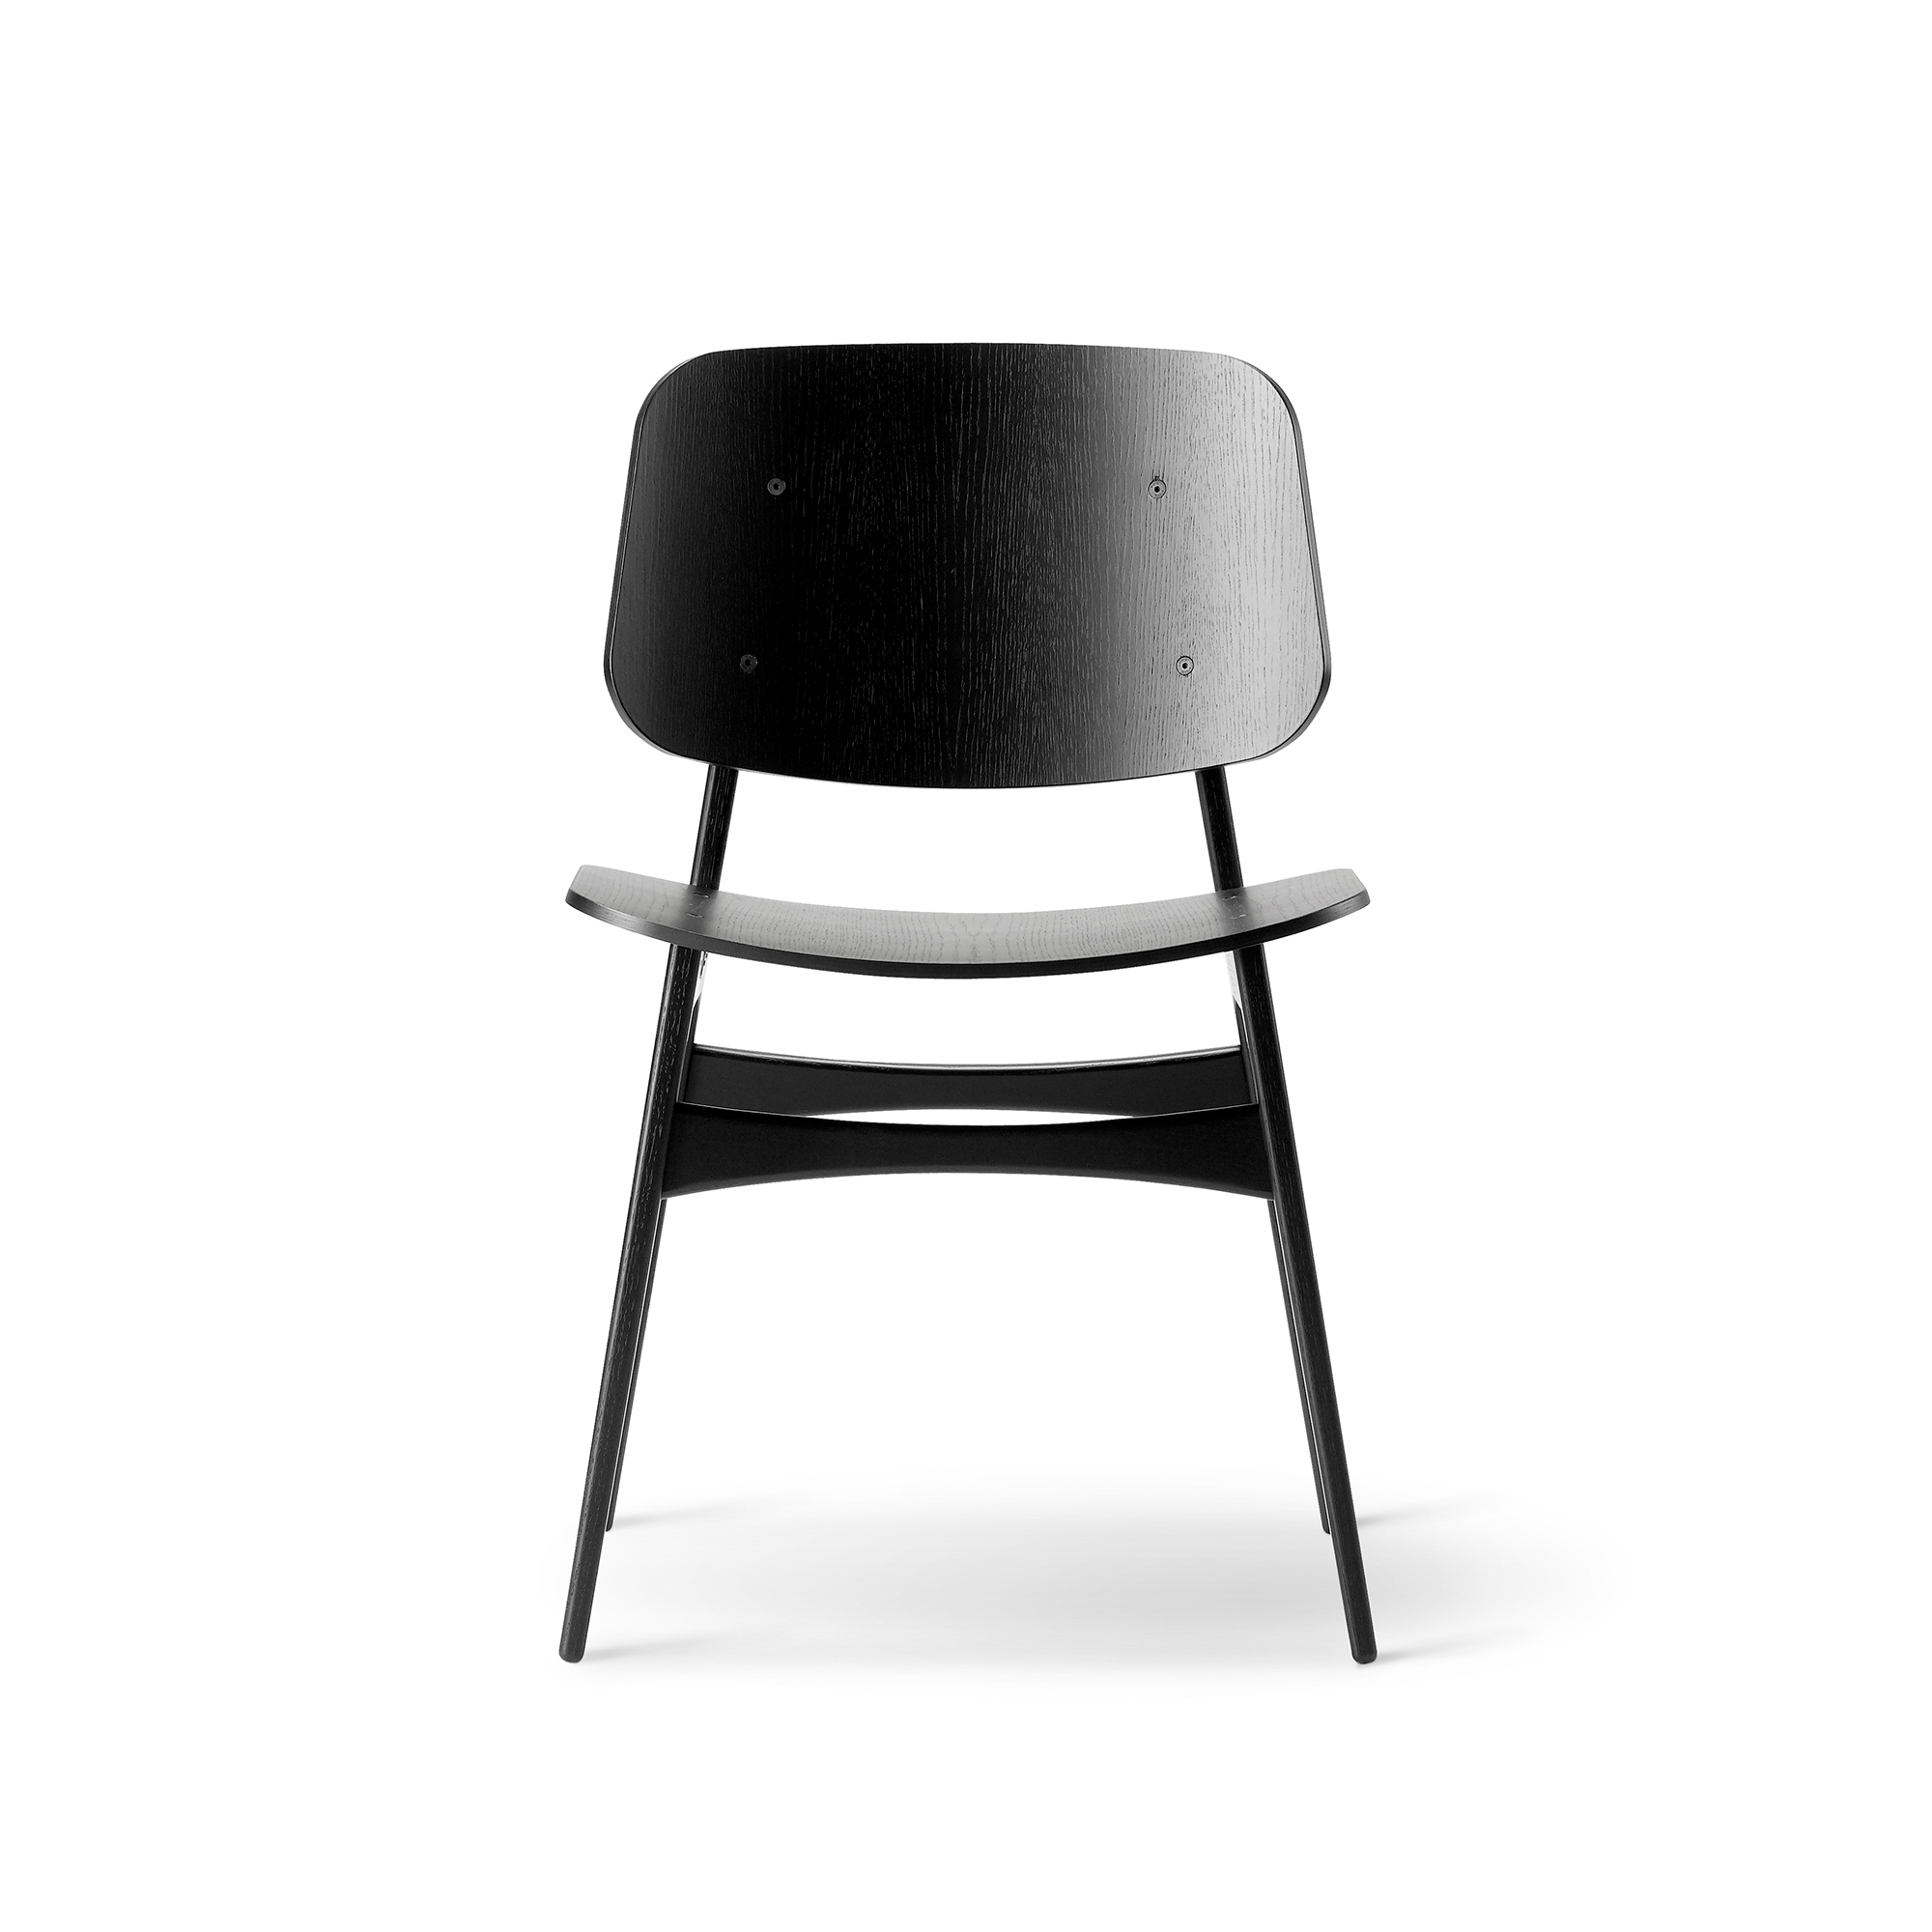 Fredericia Furniture SÃ¸borg Wood Dining Chair Black Lacquered